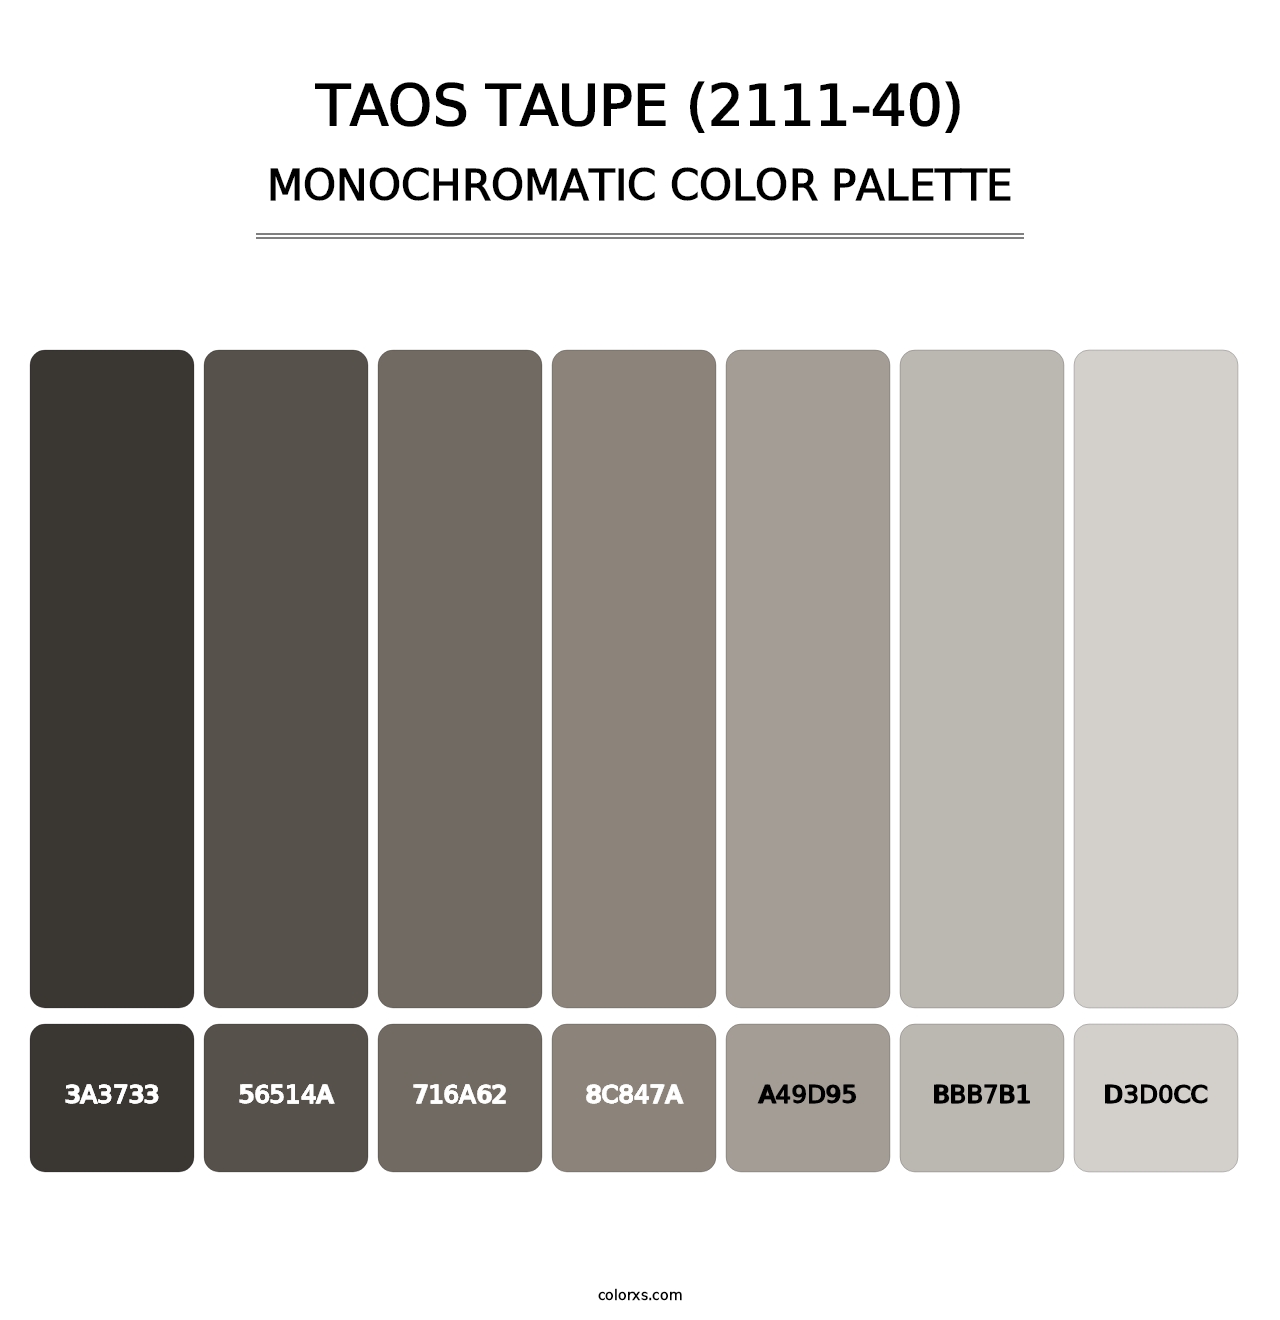 Taos Taupe (2111-40) - Monochromatic Color Palette